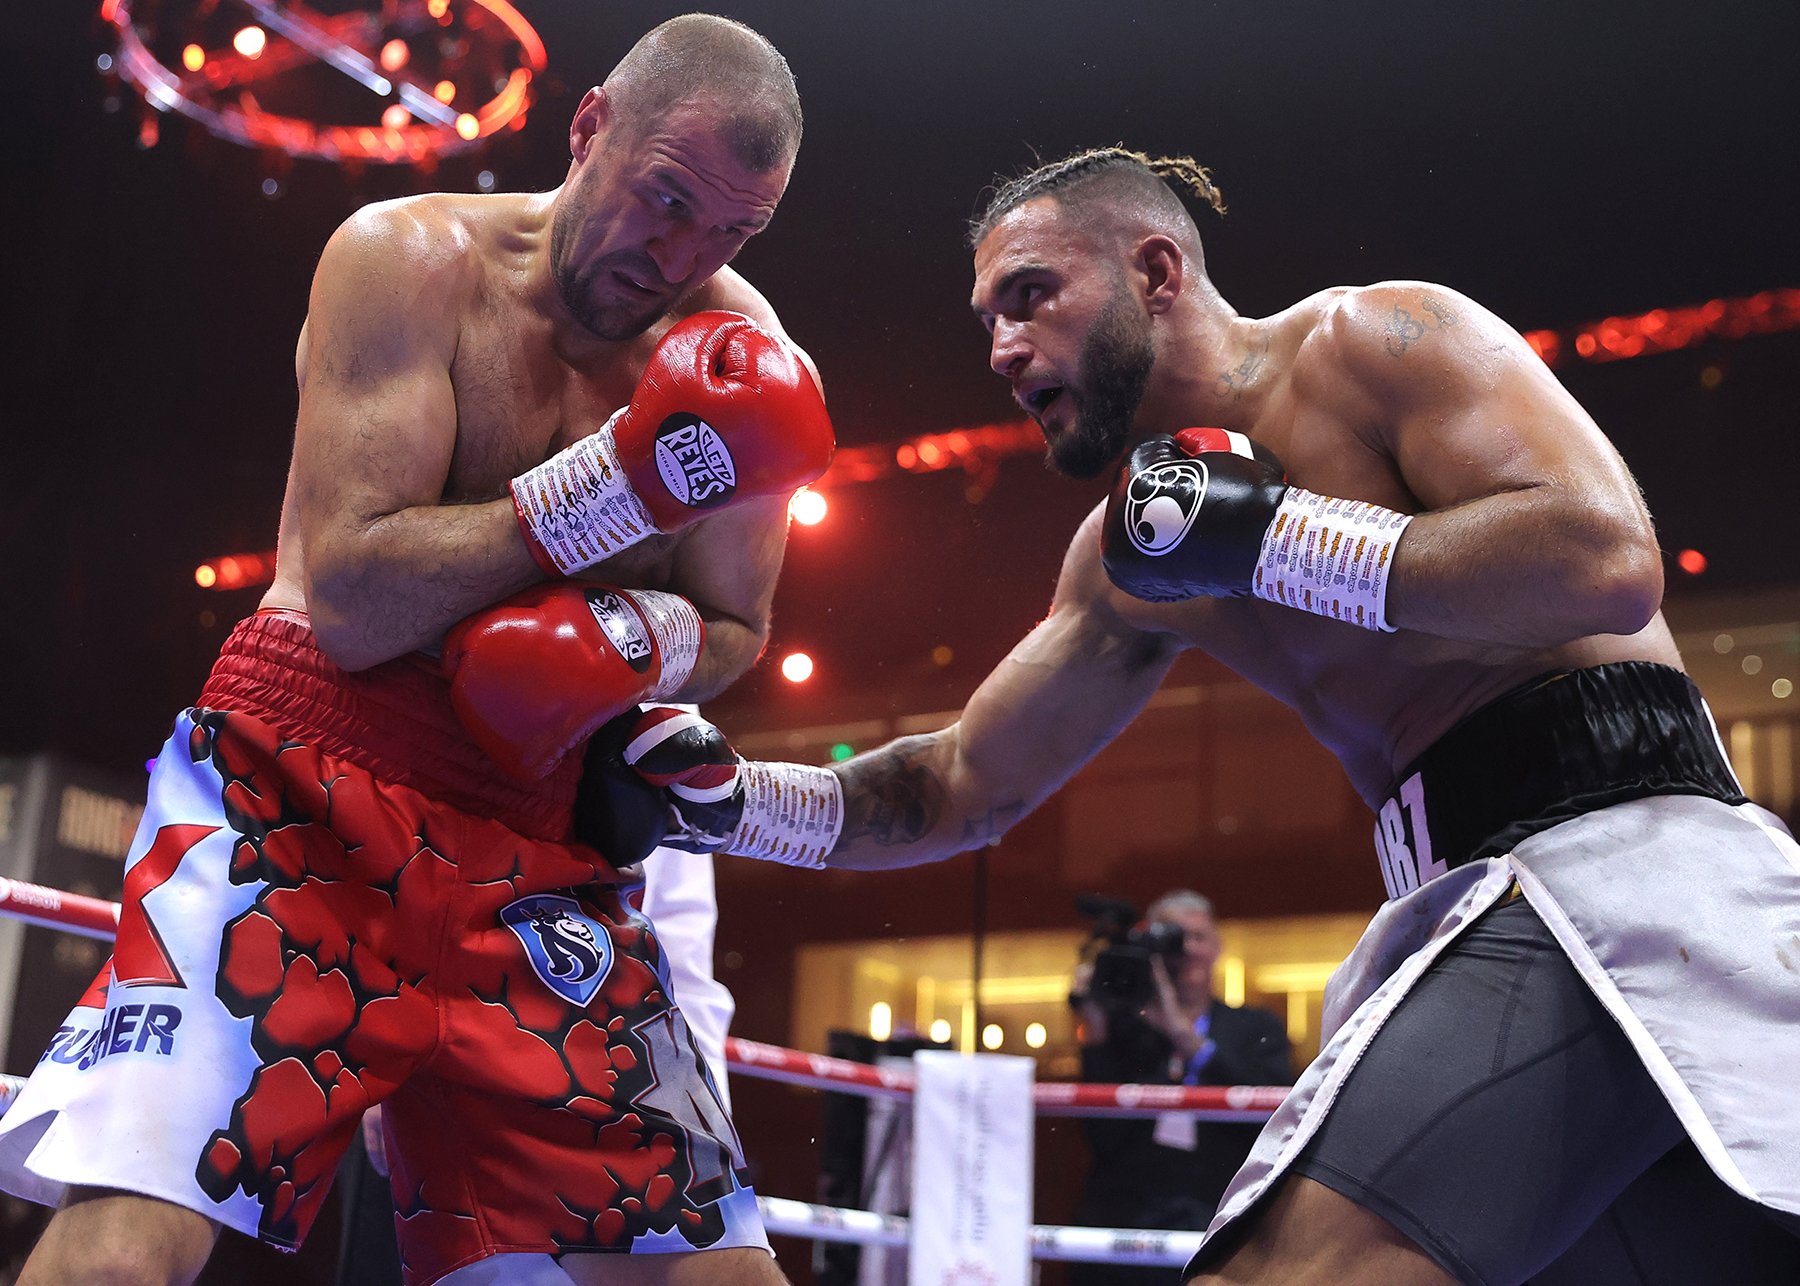 Robin Safar delivers the performance of his life, beating Sergey Kovalev